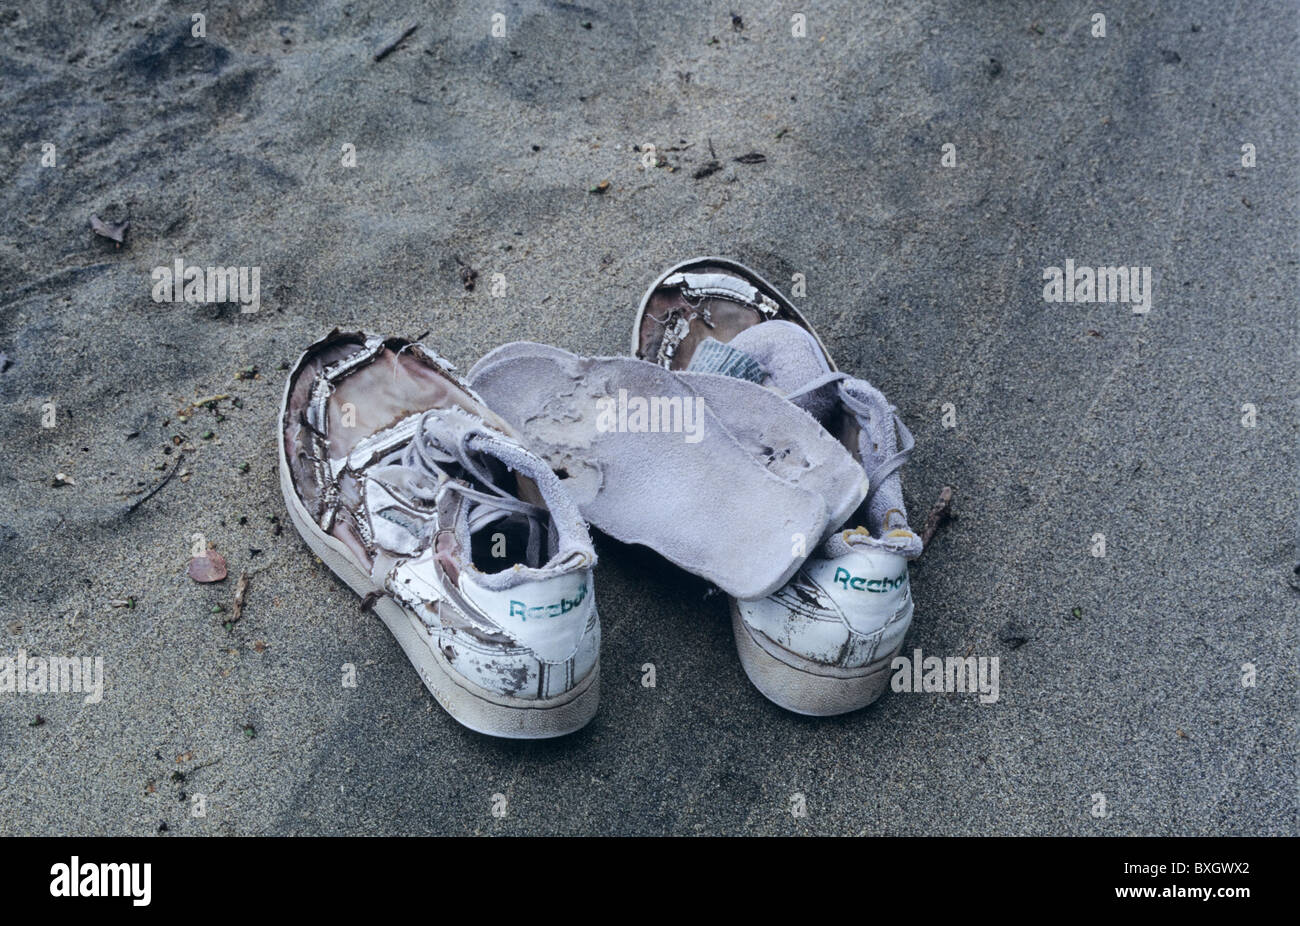 Costa Rica, rotten reebock Sneakers, worn, removed insoles, grey sand Stock Photo